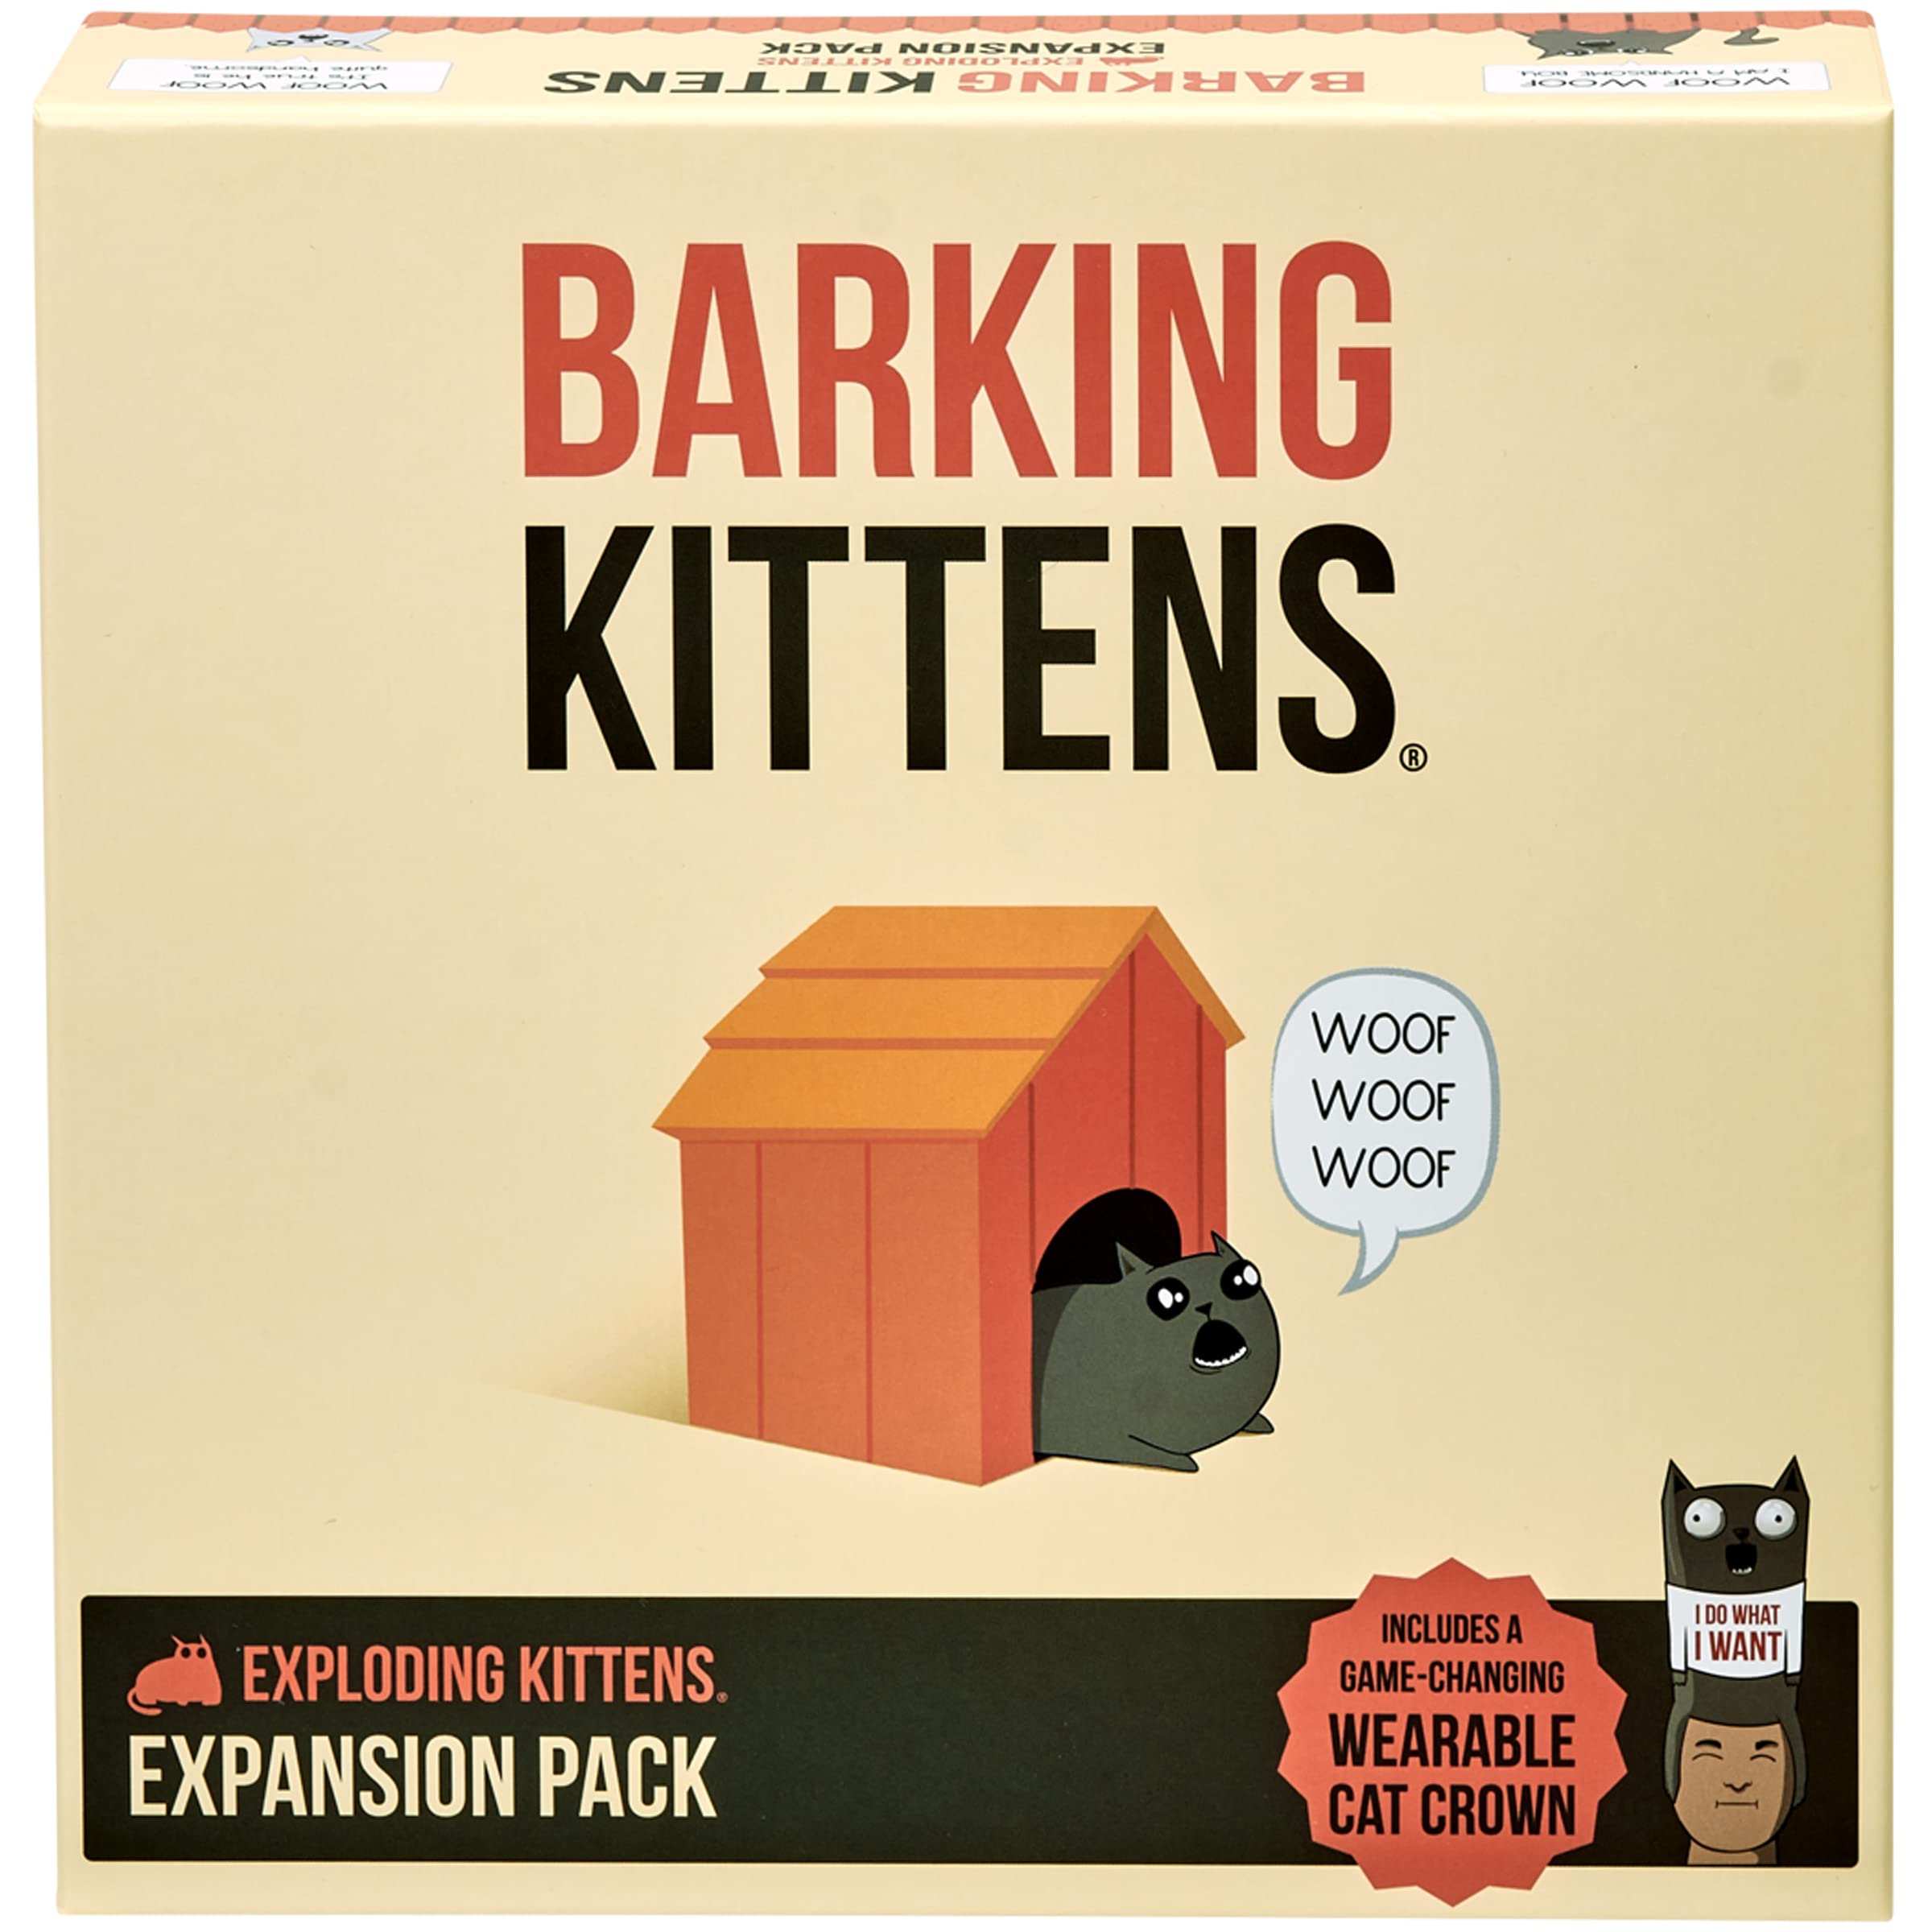 Barking Kittens Expansion Set - A Russian Roulette Card Game, Easy Family-Friendly Party Games - Card Games for Adults, Teens & Kids - 20 Card Add-on